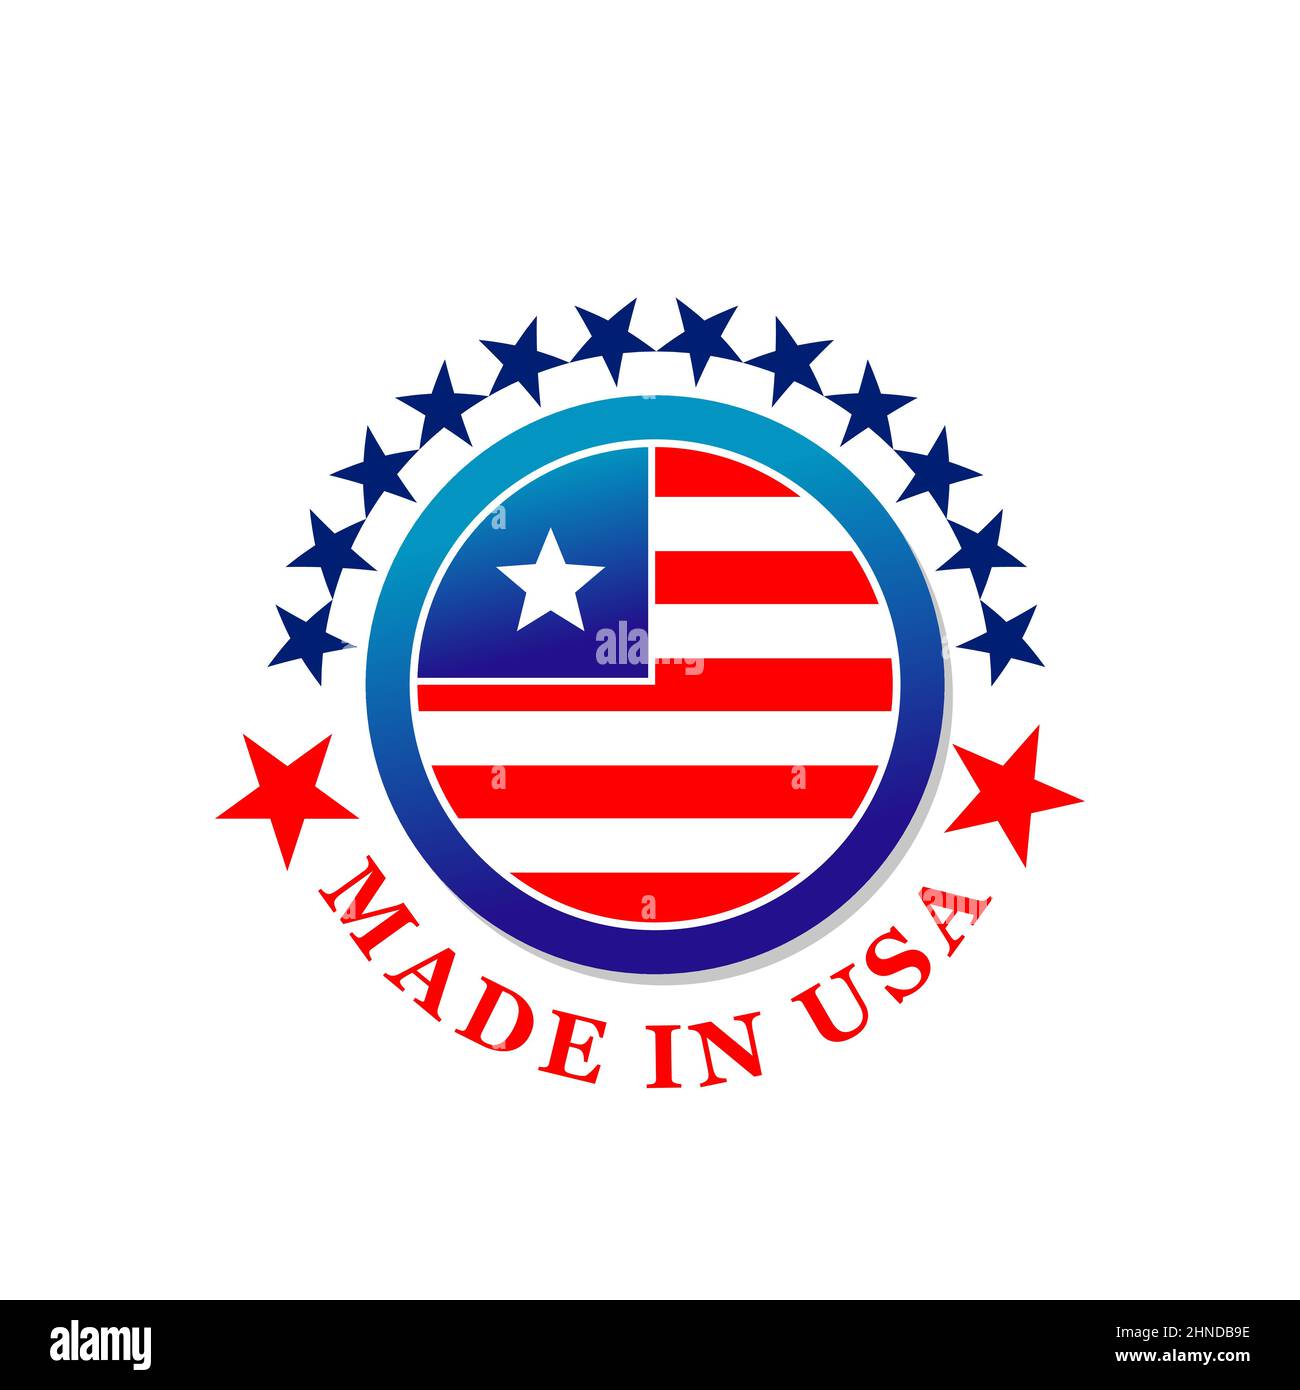 Made in USA label icon with vector flag of United States of America. Isolated round badge with American national banner of red, white and blue stripes Stock Vector